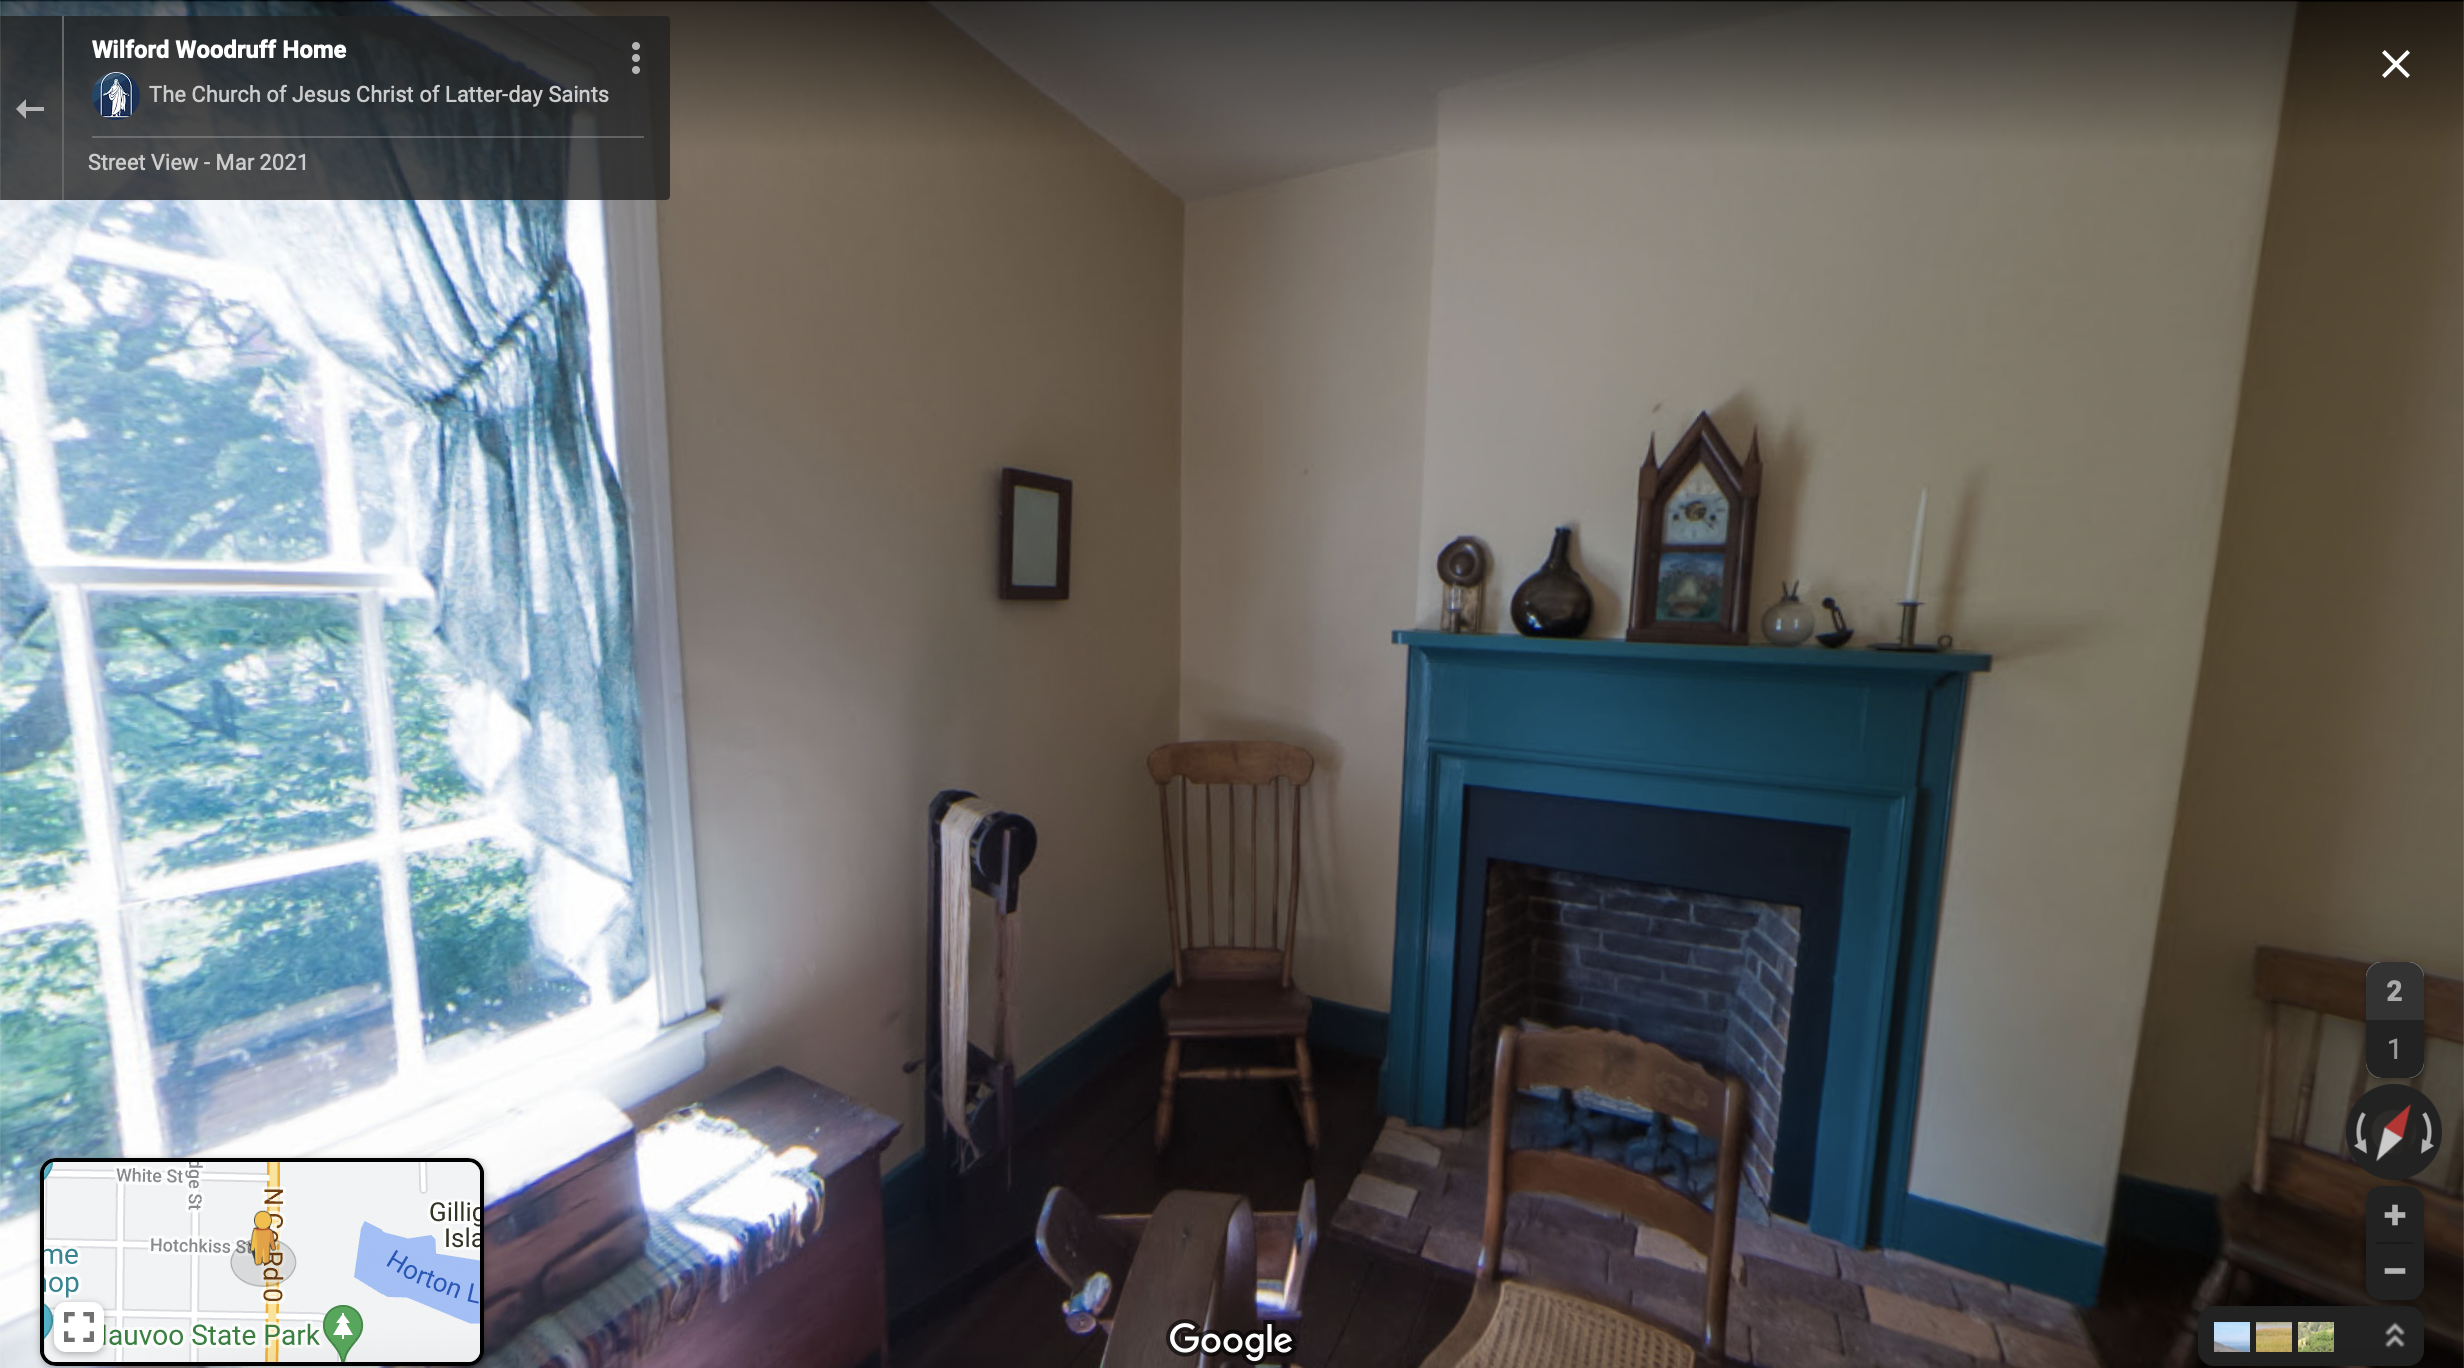 Screenshot of the Google Maps 360 view of the Wilford Woodruff Home